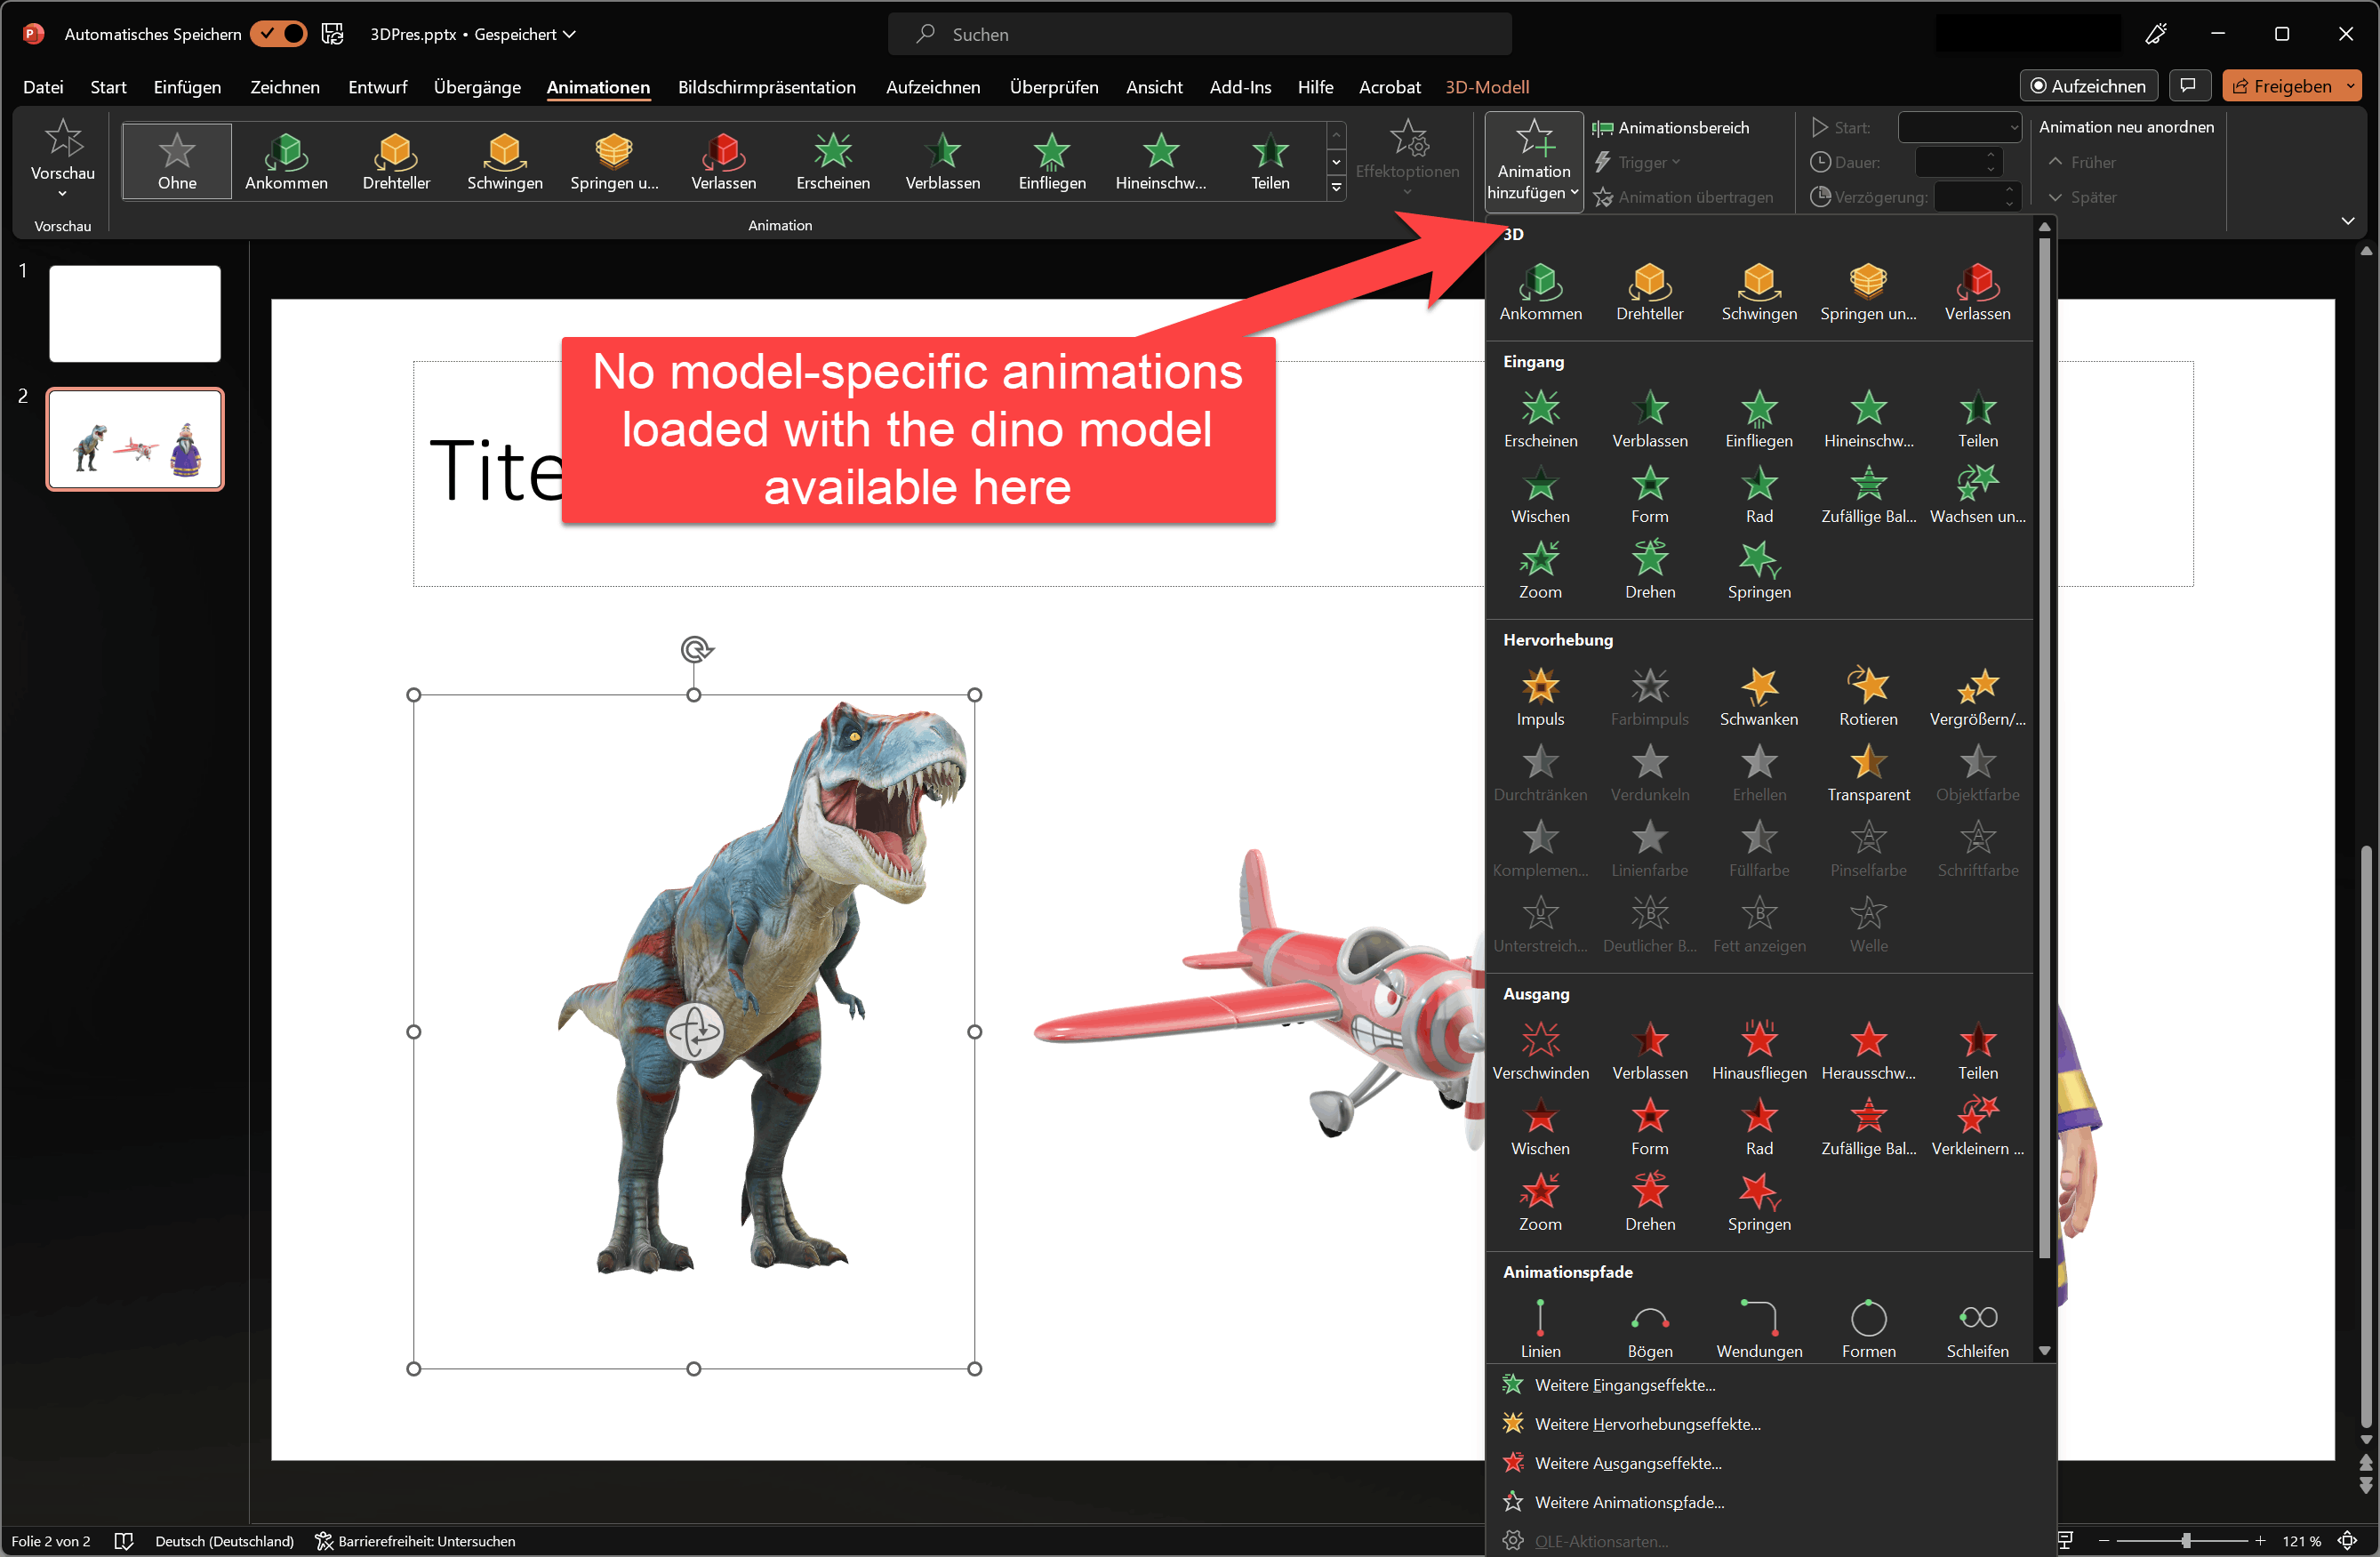 Powerpoint: 3D Model Specific Animations not available - Microsoft Community